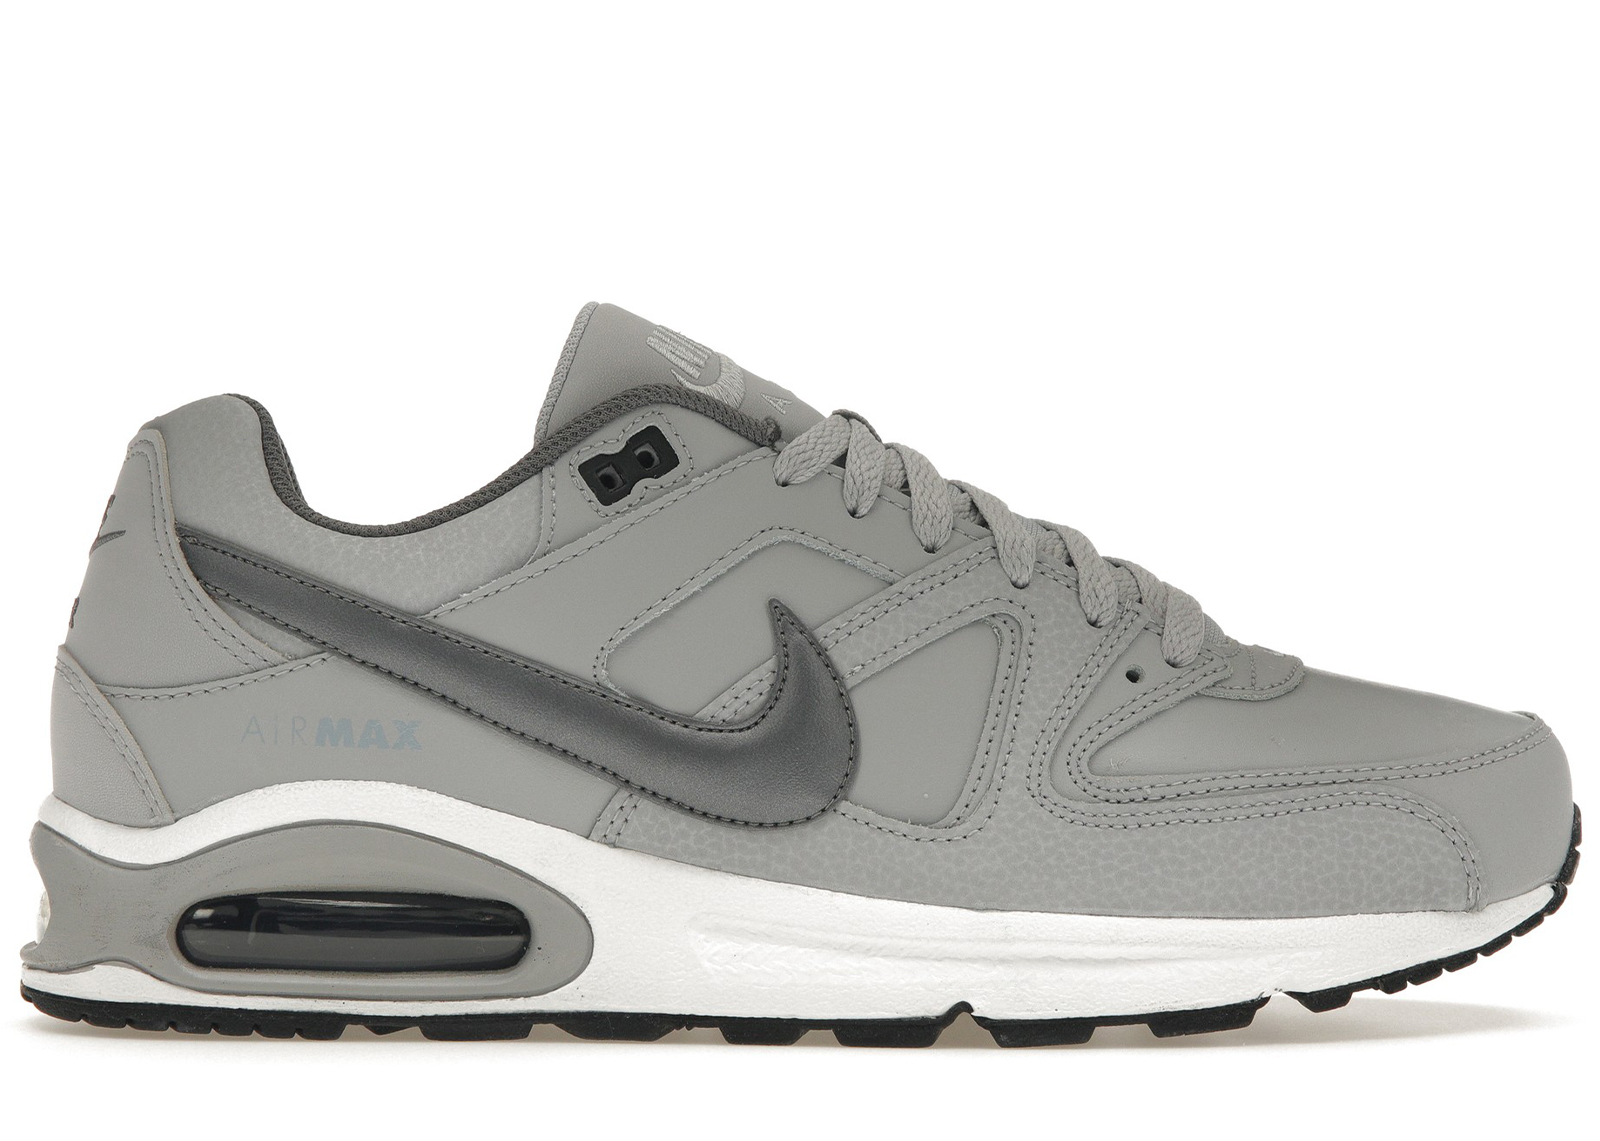 Nike Air Max Command Wolf Grey Men's - 749760-012 - US